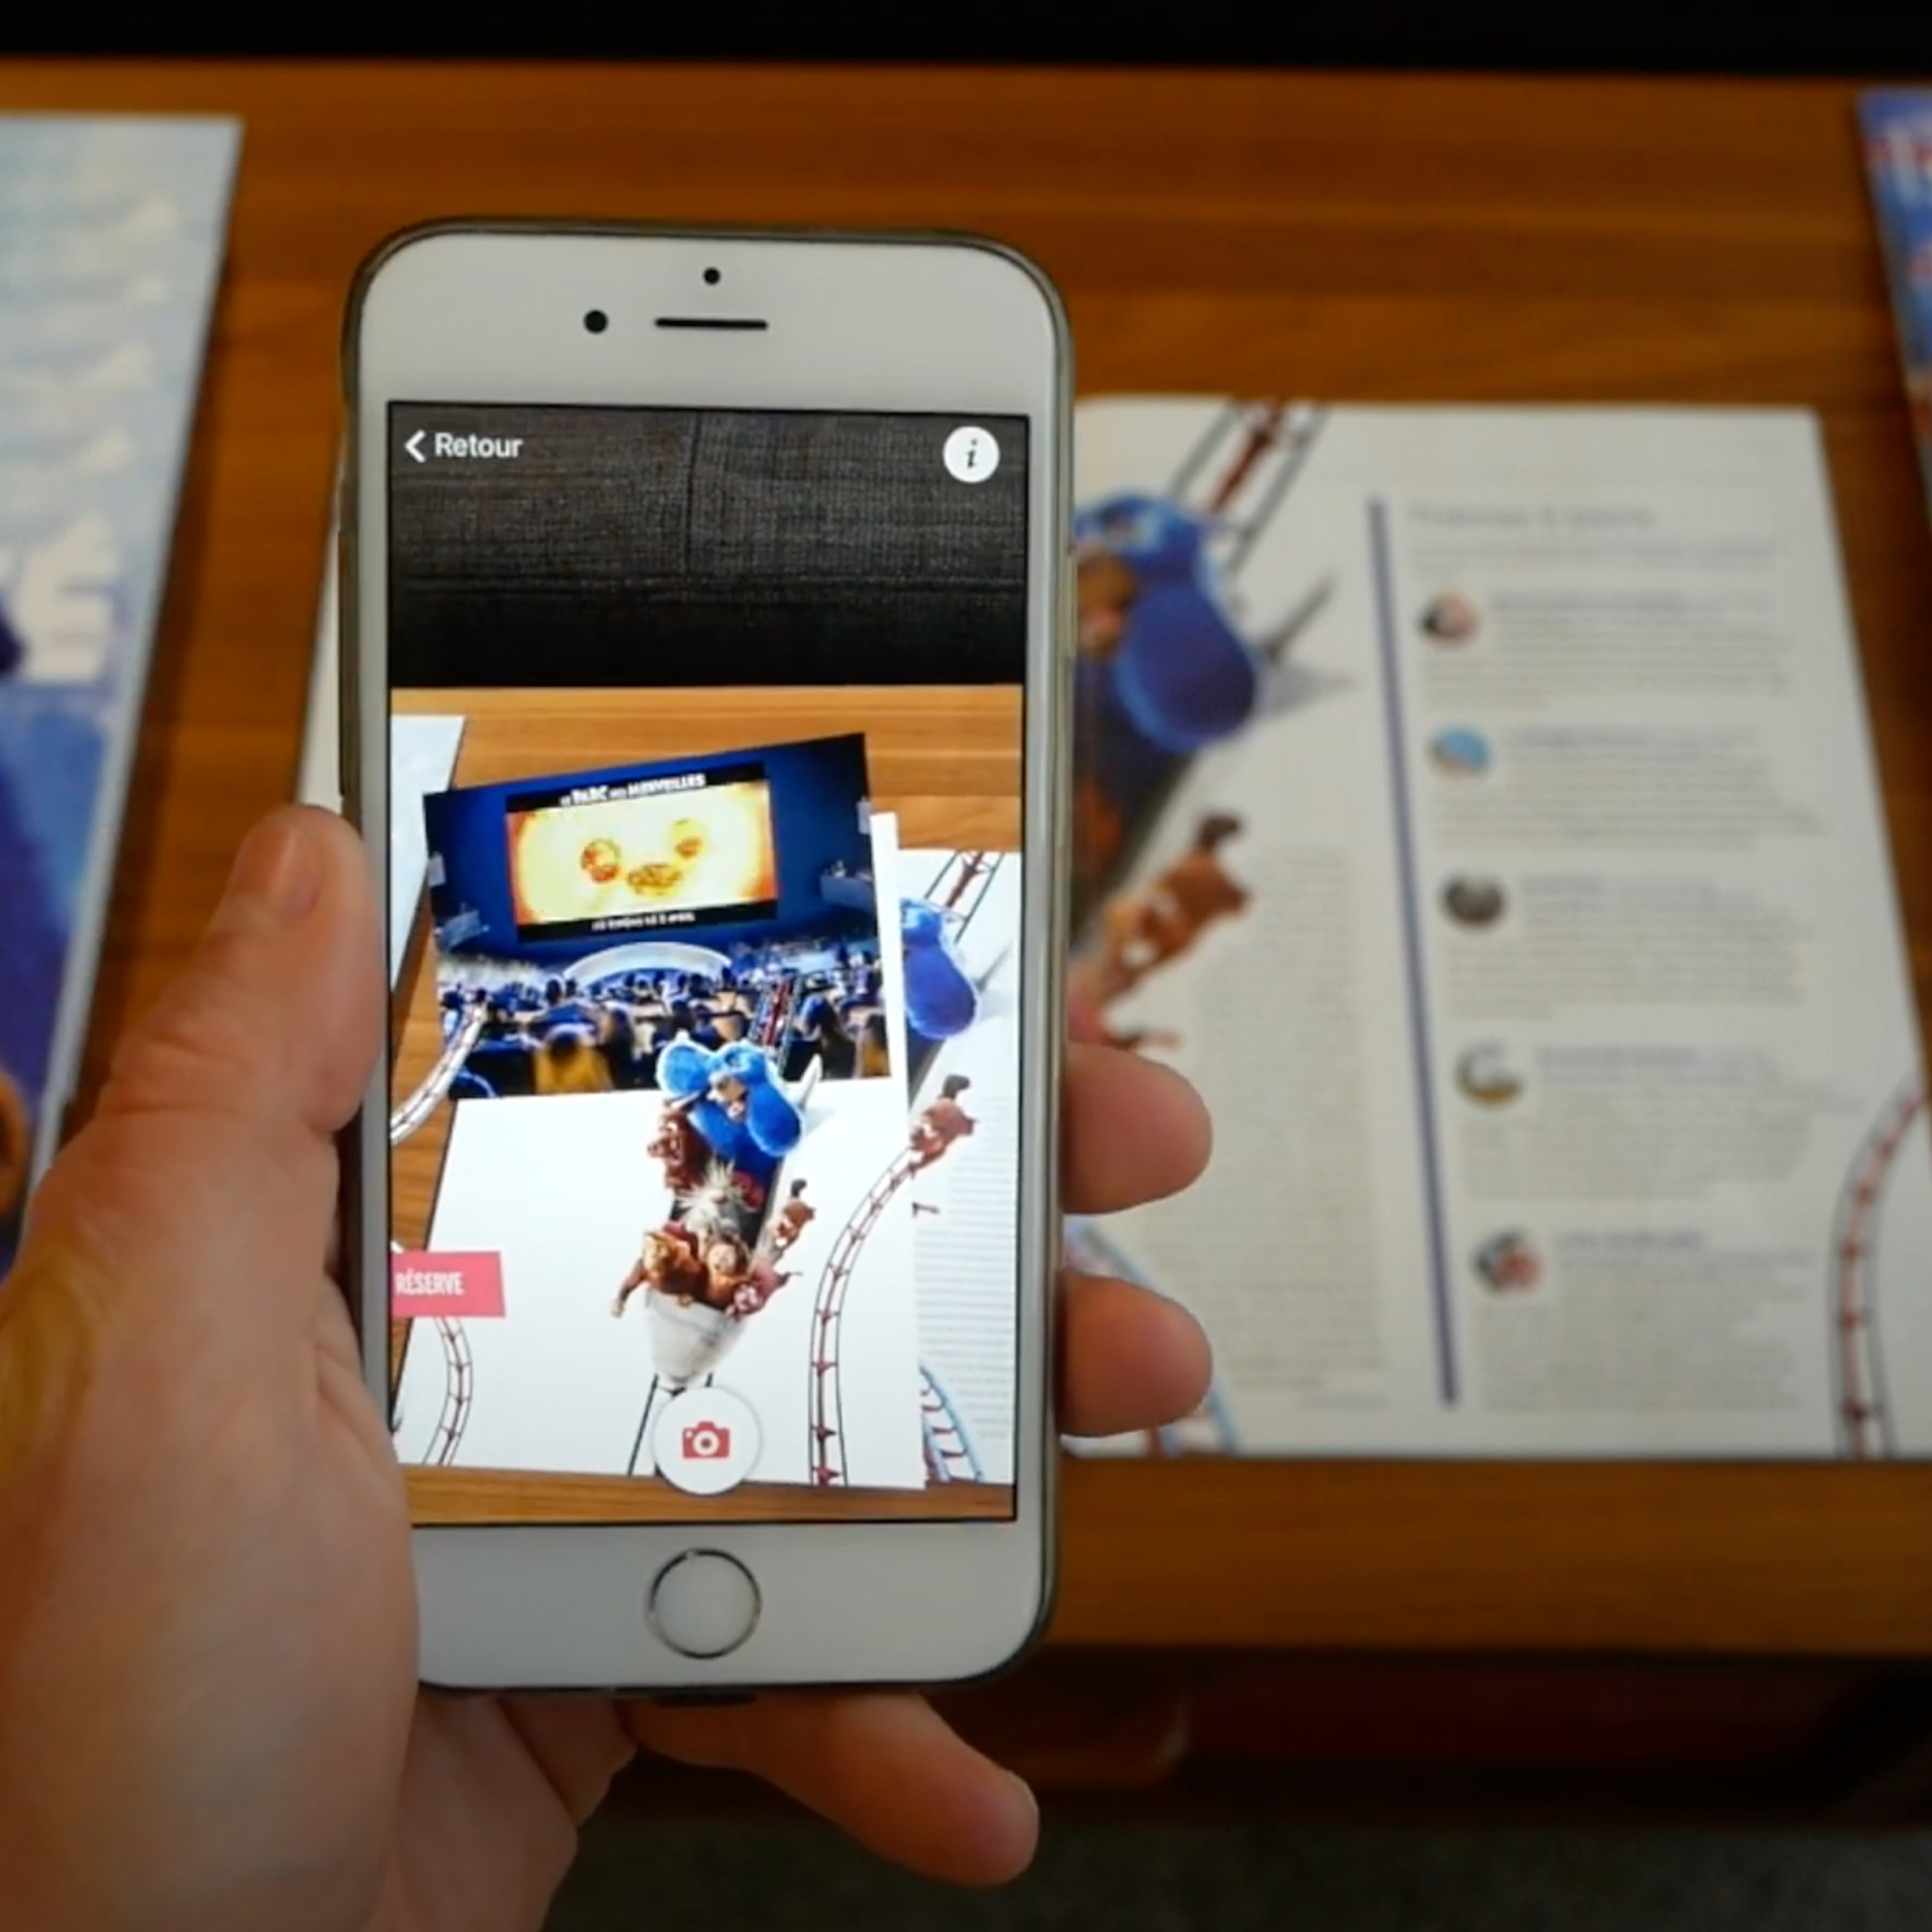 ARGOplay connects printed matter with the digital world, A smartphone screen displaying the printed catalog and increases, characters from the movie Ratatouille